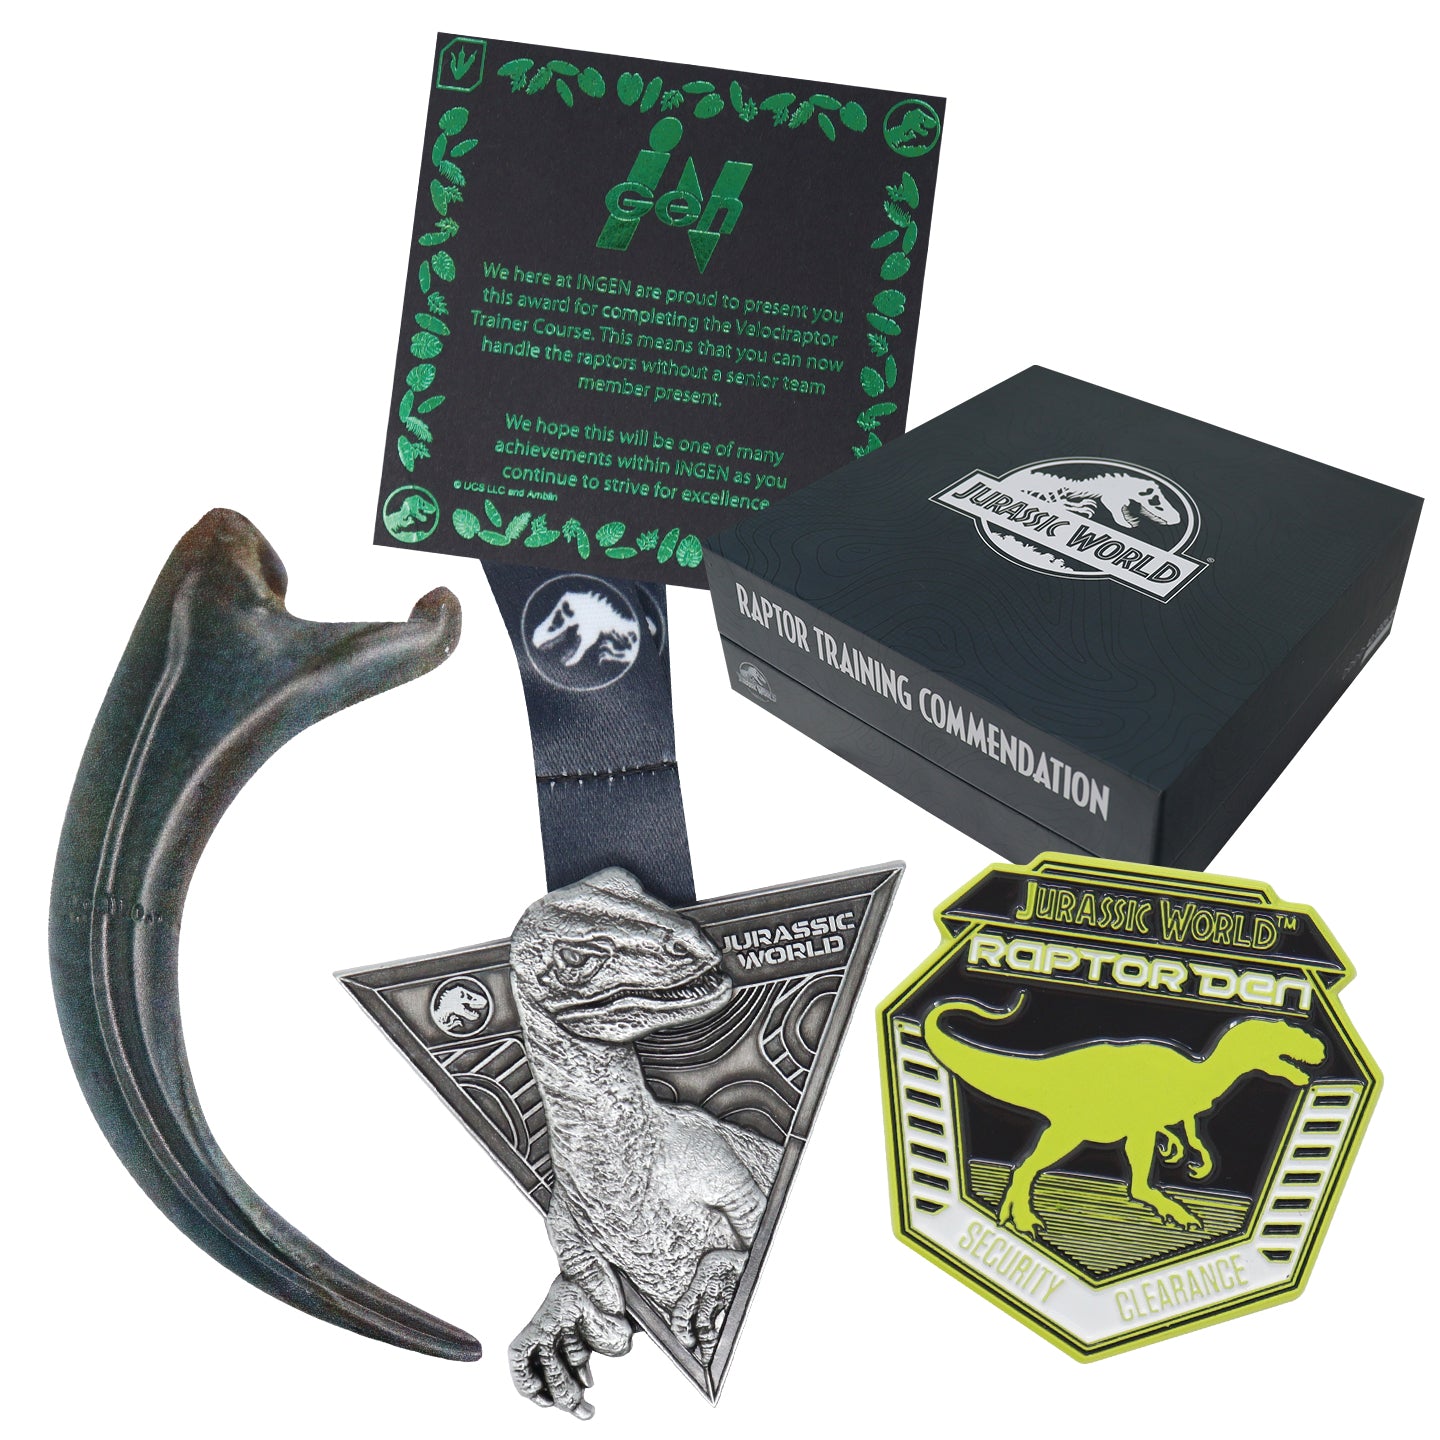 Jurassic World Limited Edition Replica Security Badge 